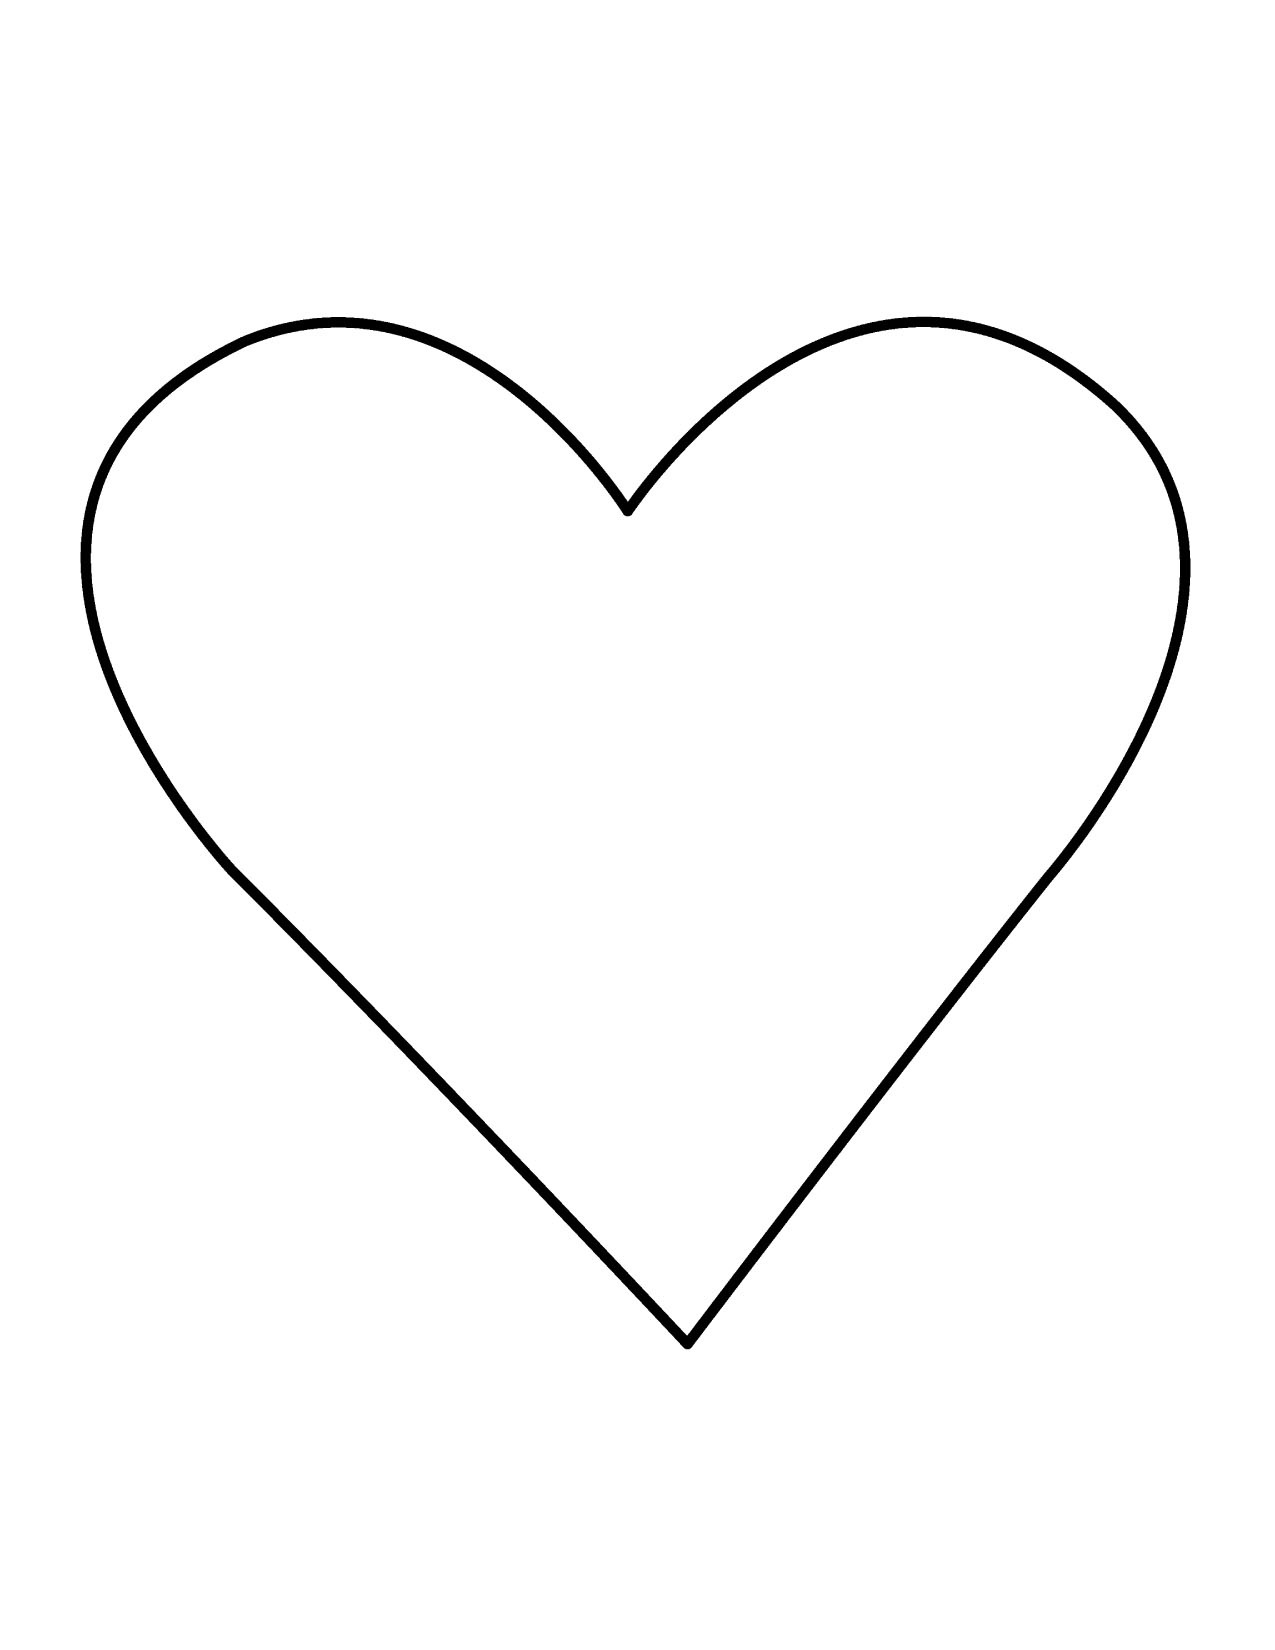 Heart Clipart Black And White - download clipart for free - wedding heart clipart, valentines day clipart, scribble heart clipart, rose gold heart clipart, red heart clip art free, red heart clip art, heart wreath clipart, heart scroll clip art, heart pink clipart, heart garland clipart, heart clipart red, heart clipart, heart clip art, heart candy clipart, heart banner clipart, free clipart valentines hearts, conversation heart clip art, clip art heart outline, art-works for free, animal heart clip art